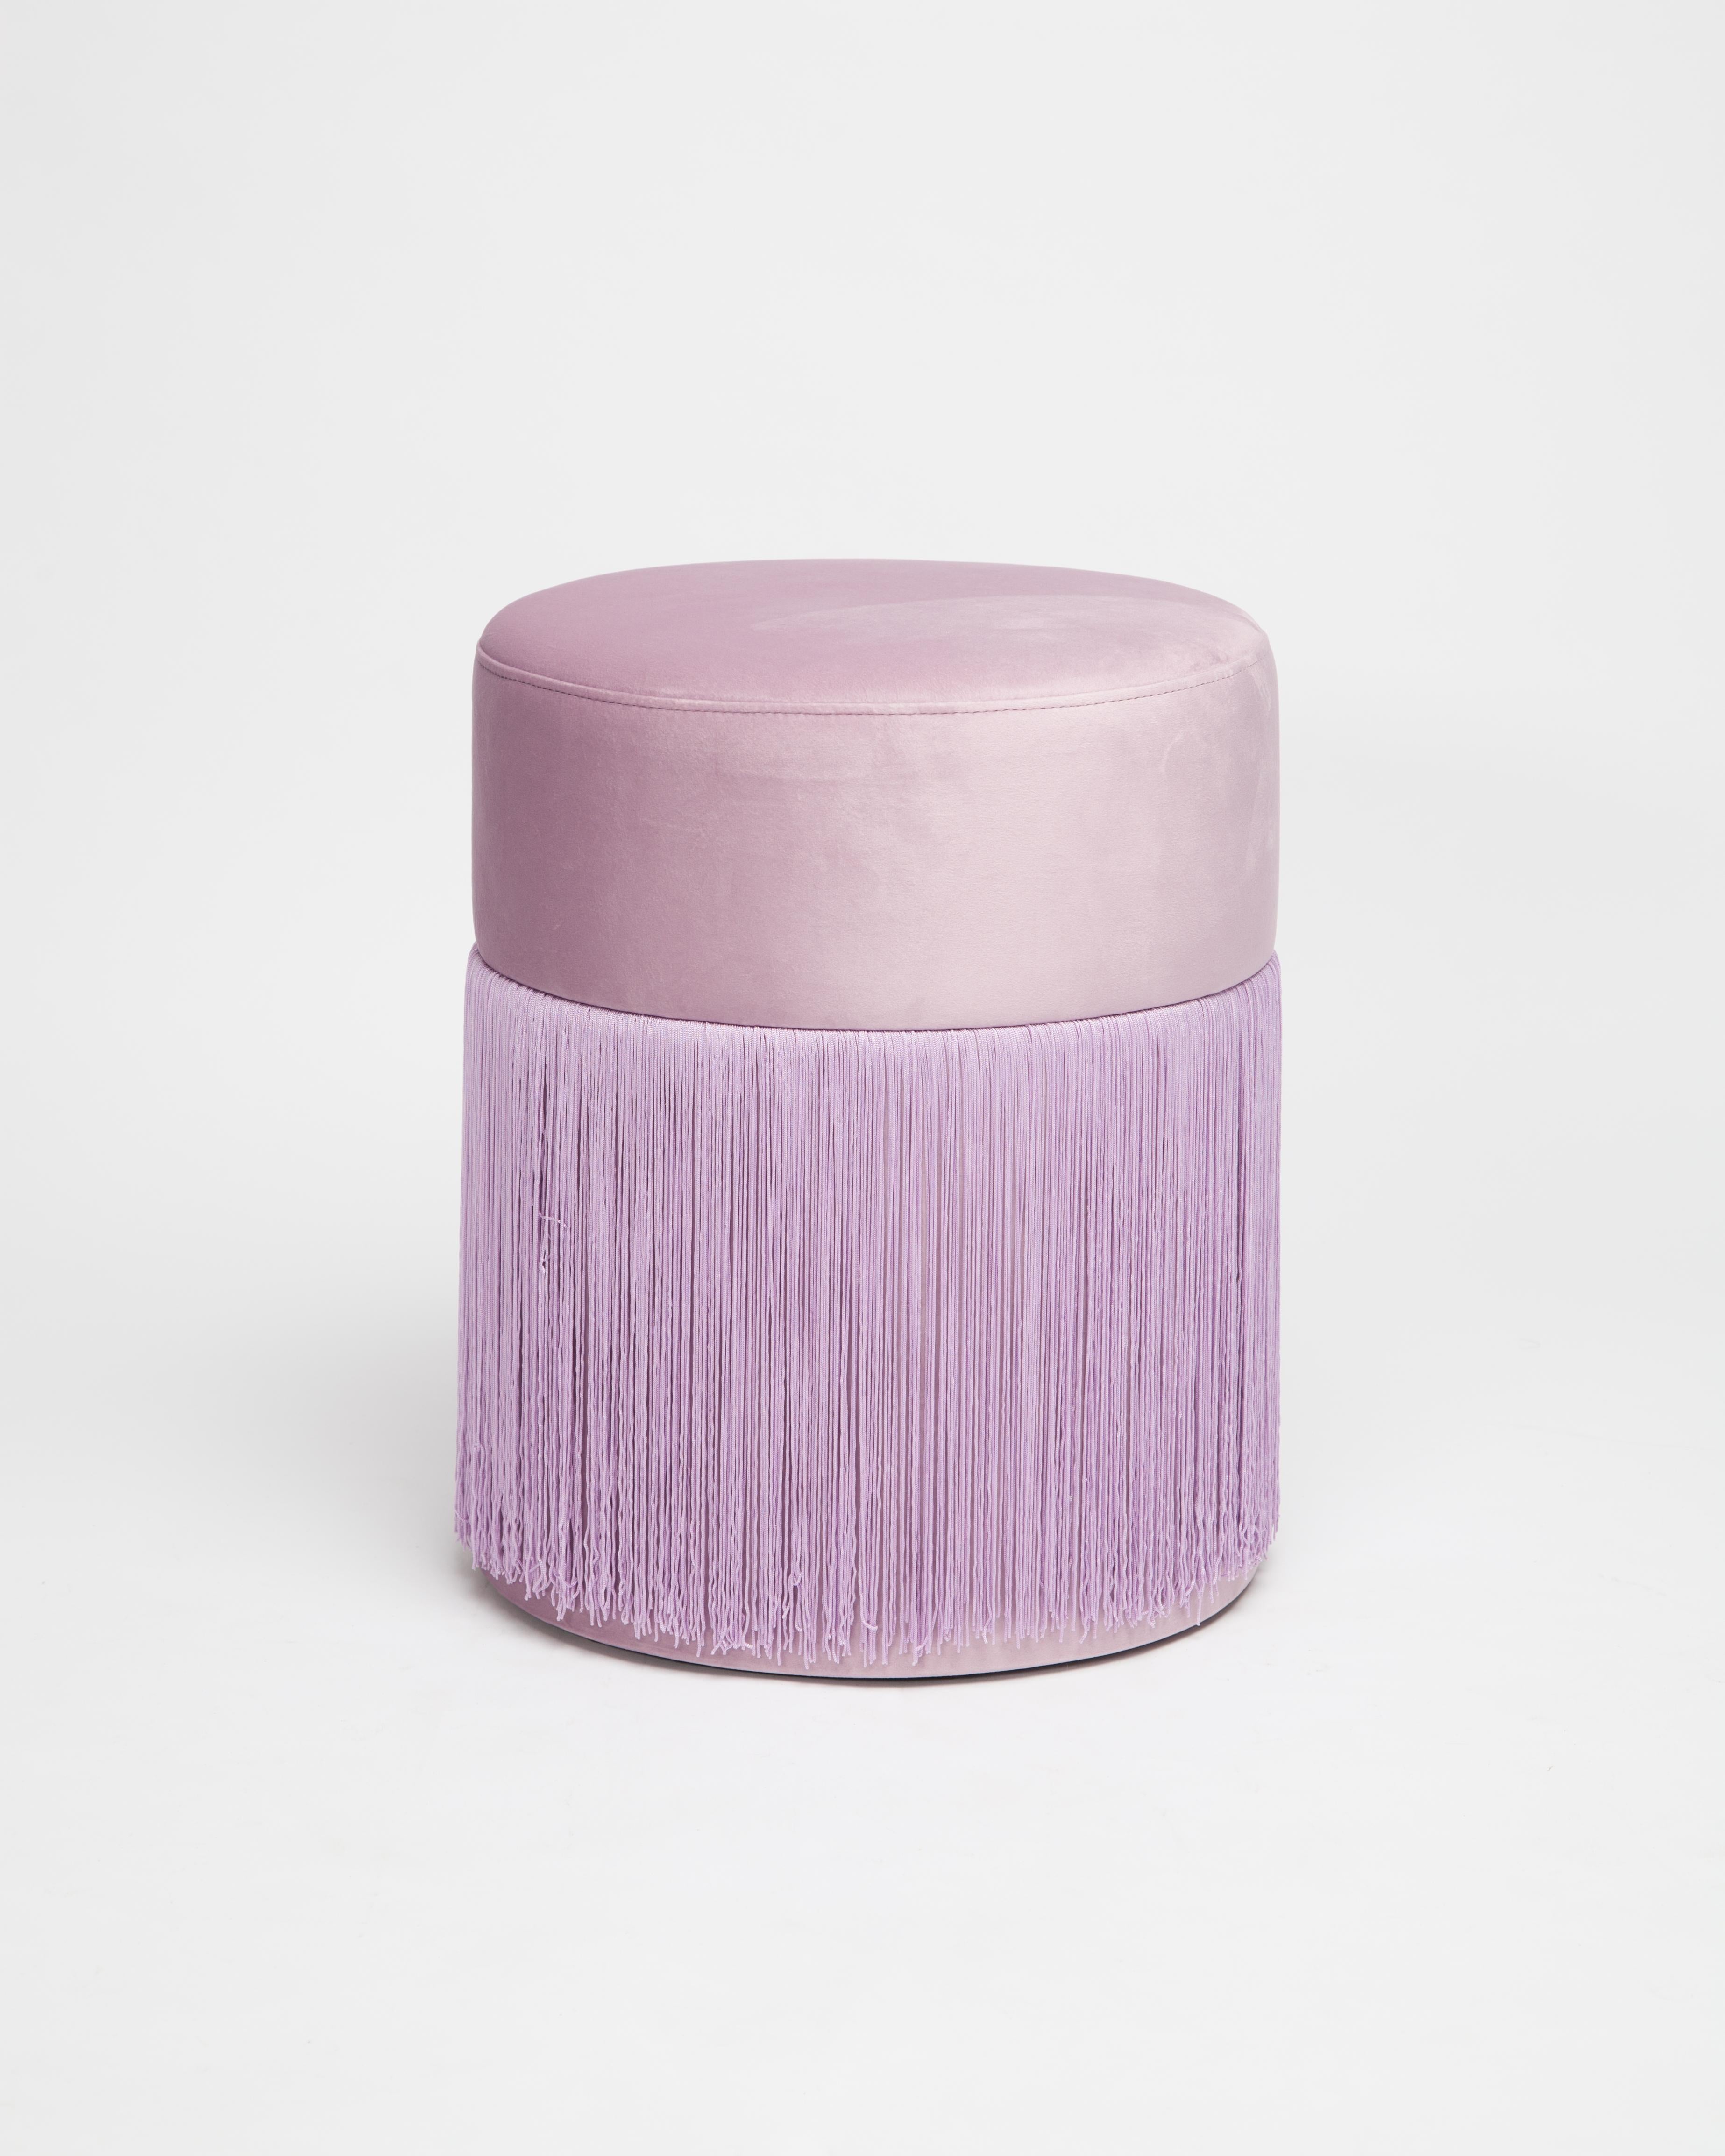 Pouf Pill S by Houtique
Dimensions: H 45 x D 35 cm
Materials: Velvet upholstery and 30cm fringes

Pill Pouf S
Art Deco style pouf with wood structure and velvet fabric.
2 fiber-board discs of 16mm, joined by wooden tufts.
Upholstery Velvet